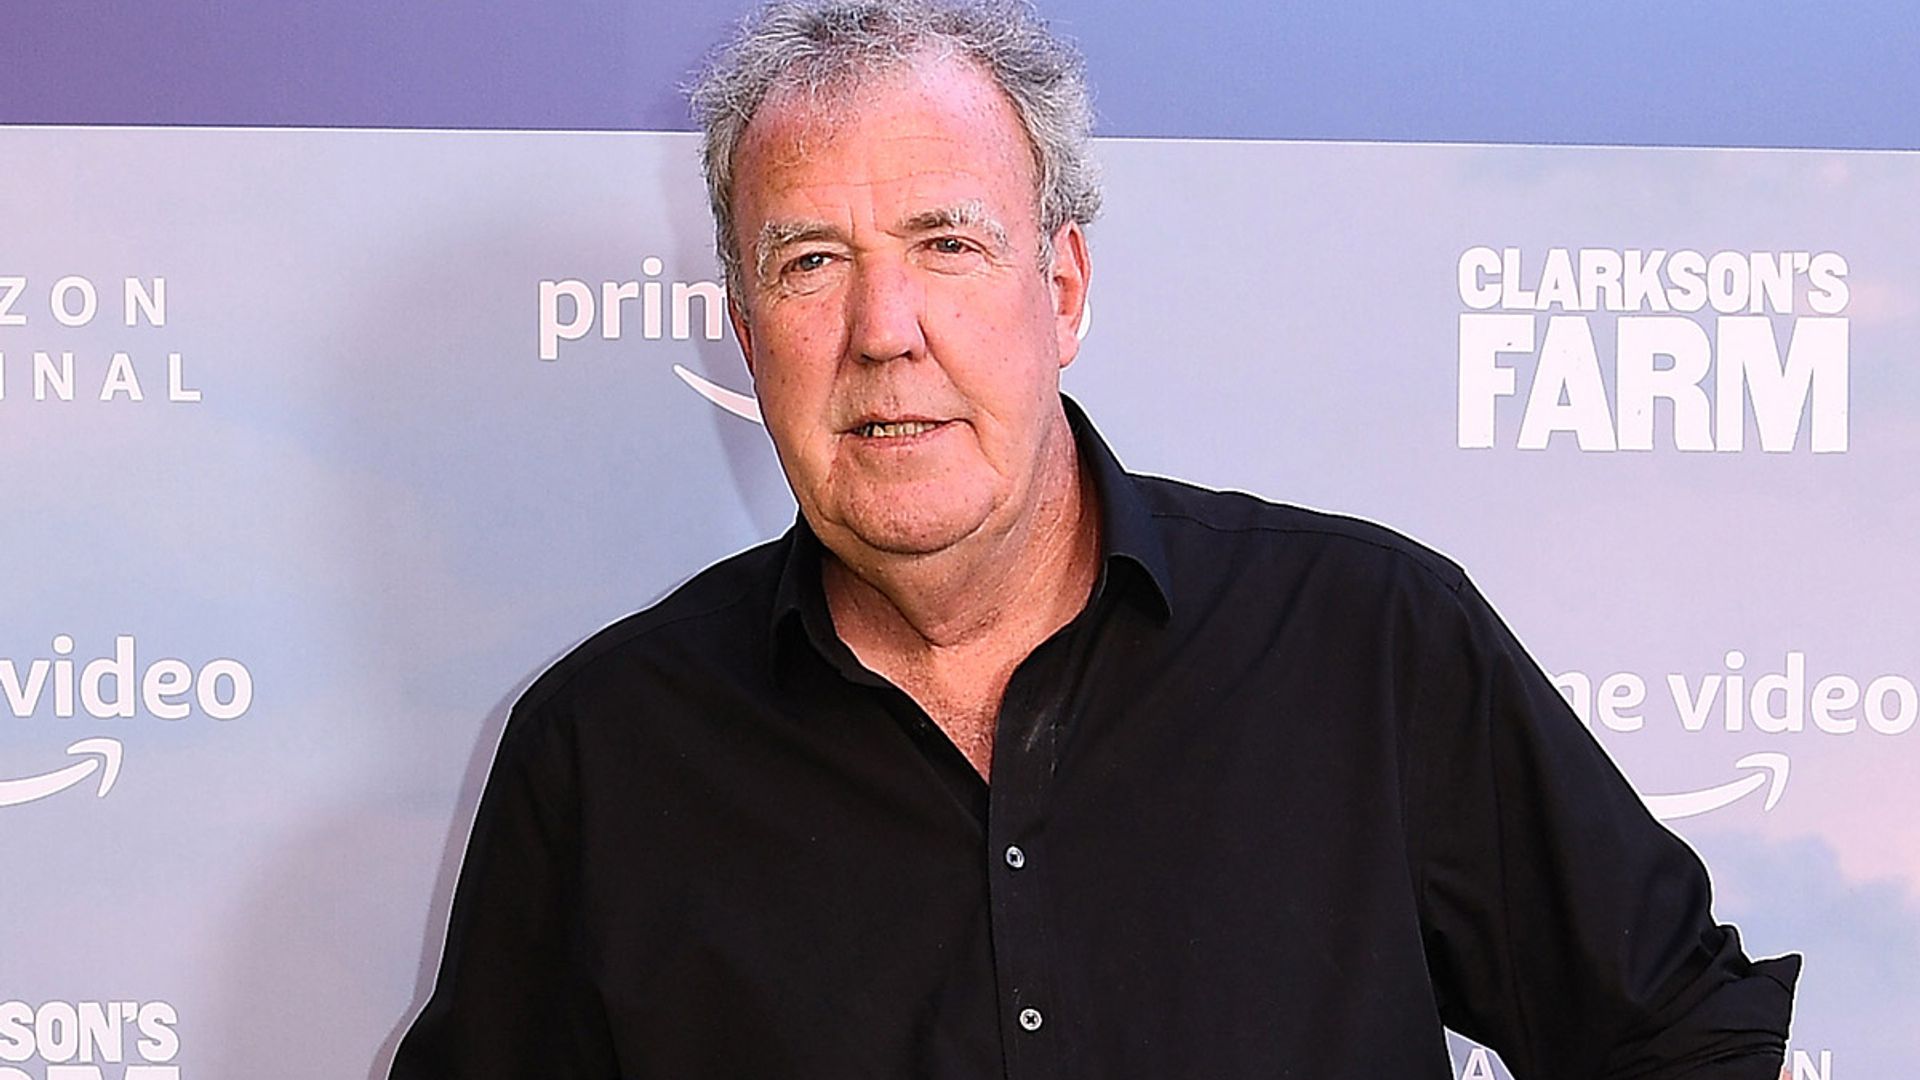 Jeremy Clarkson's daughter Emily marries in a beautiful ceremony - see photo